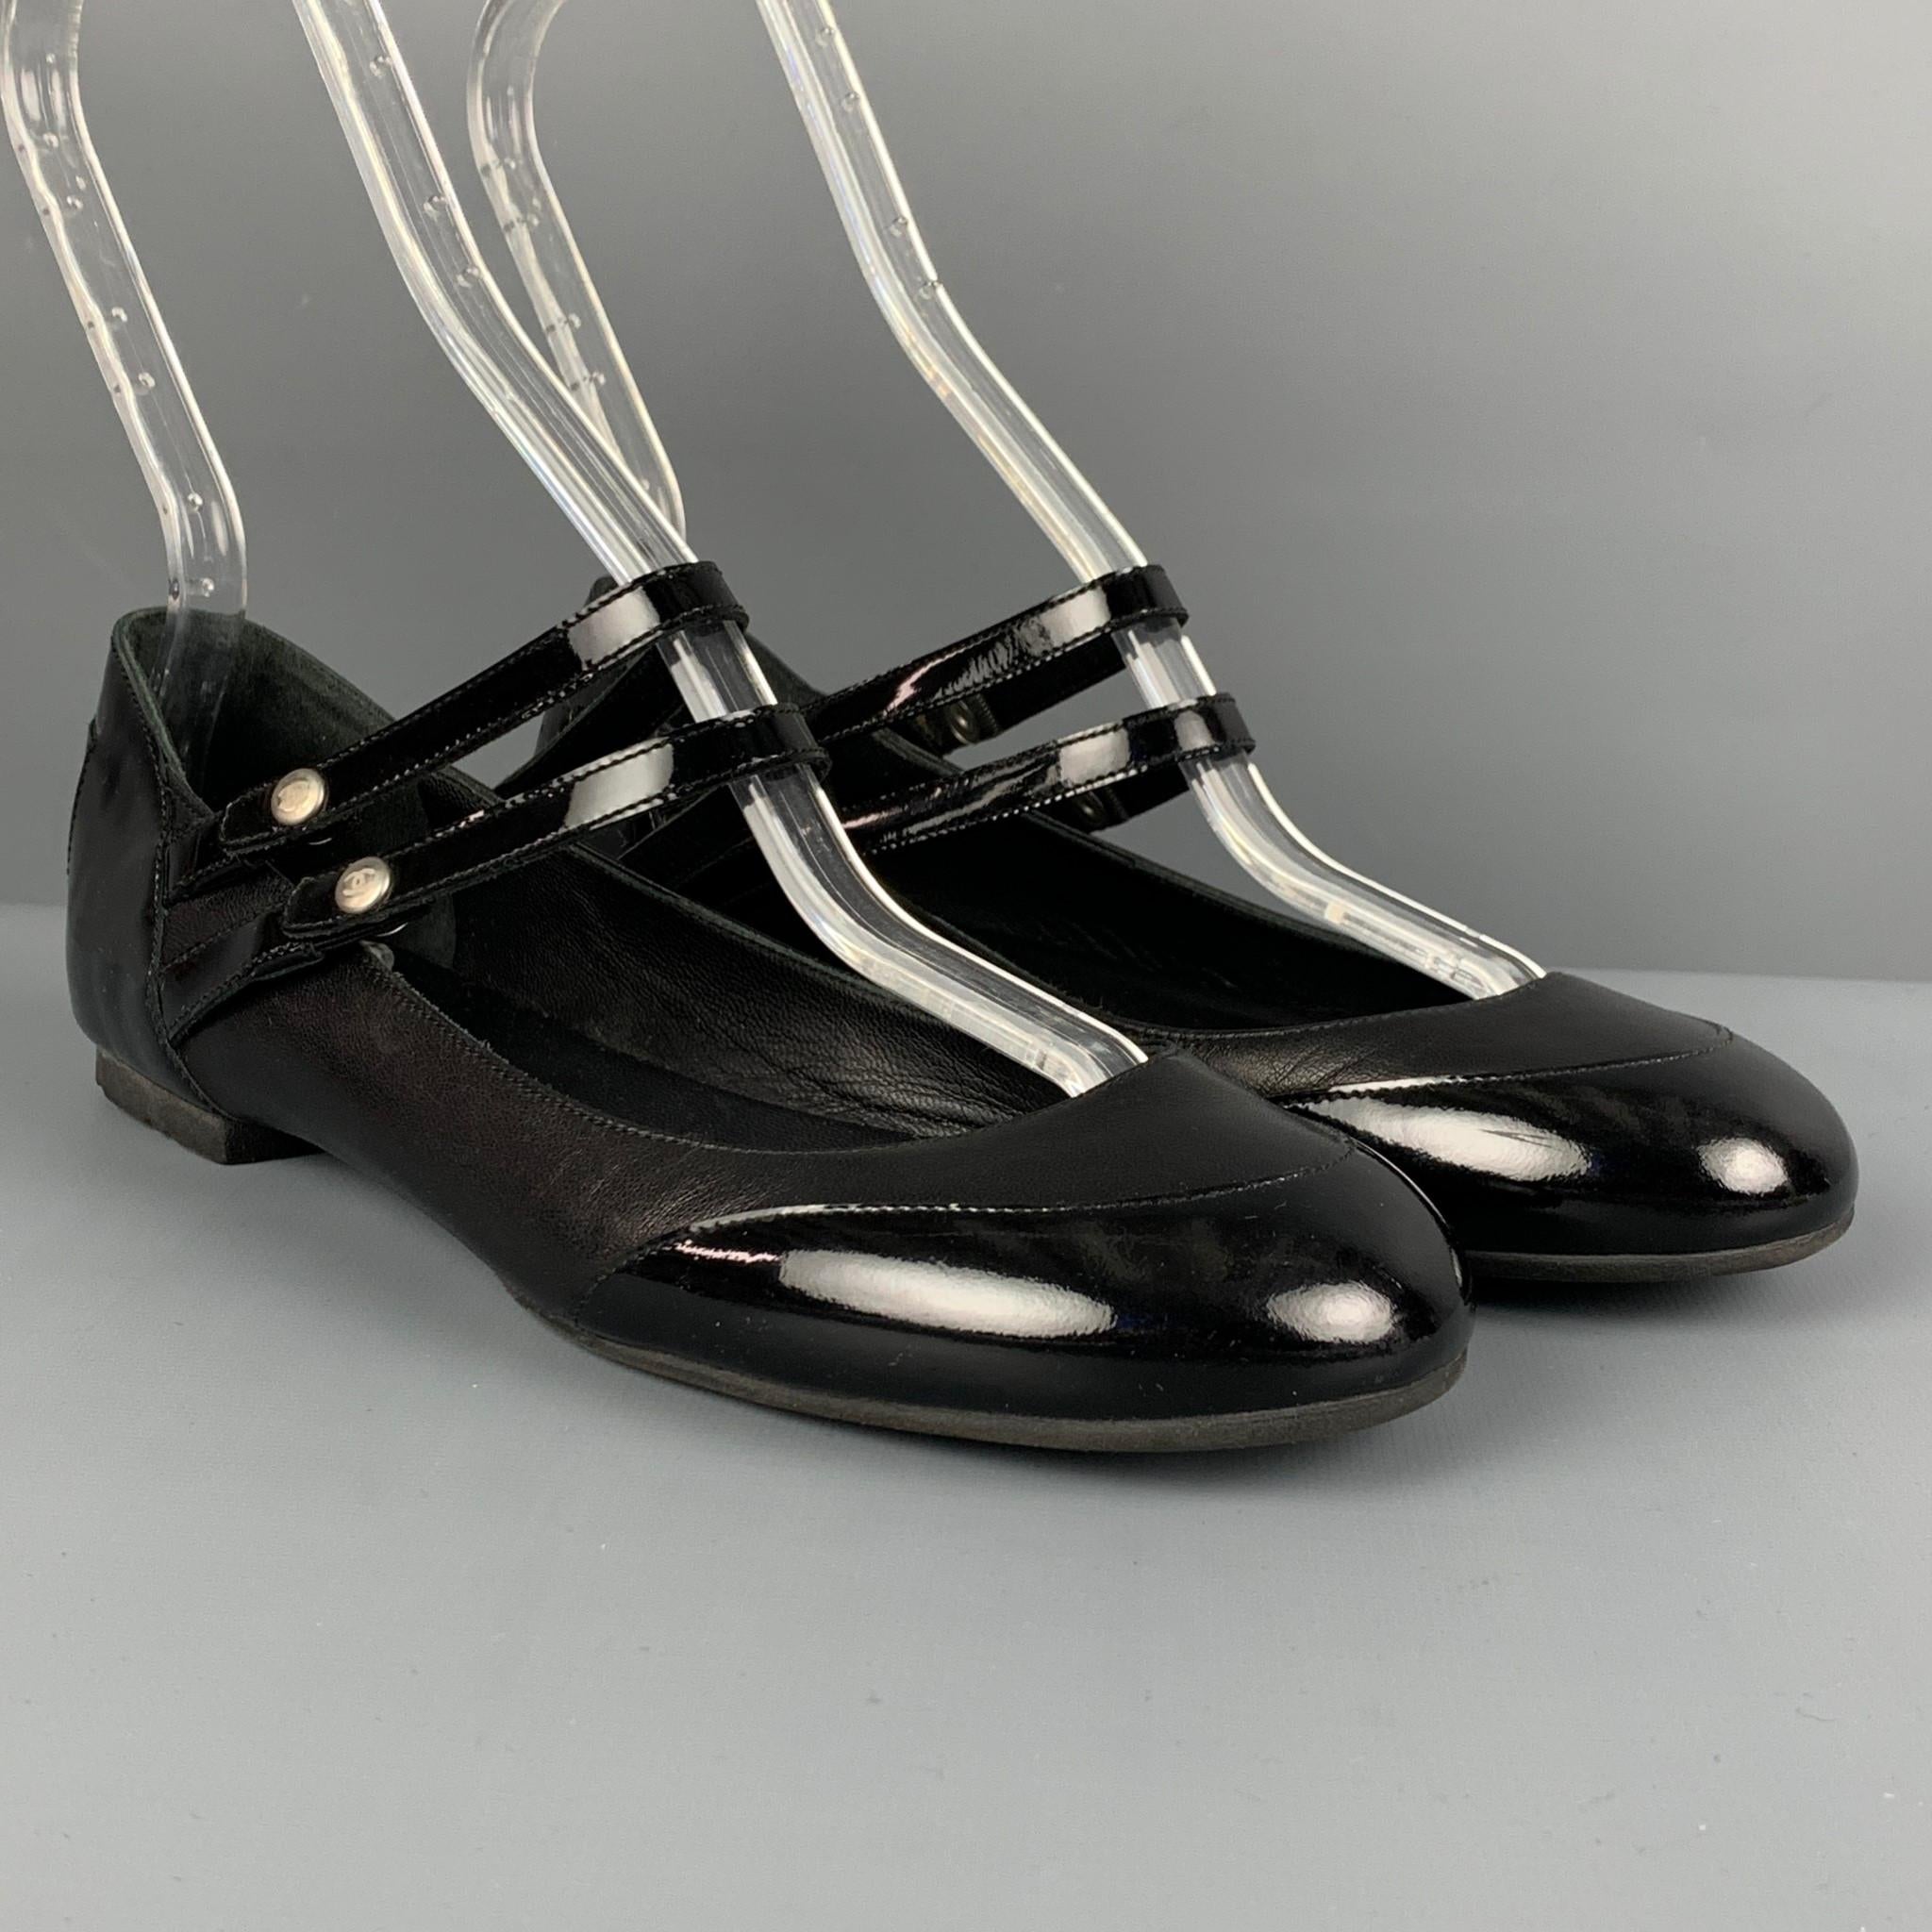 CHANEL flats comes in a black leather with a patent leather trim featuring a mary jane style, chanel logo buttons, and a double strap closure. Made in Italy. 

Very Good Pre-Owned Condition.
Marked: 38.5

Outsole: 10 in. x 3.25 in. 